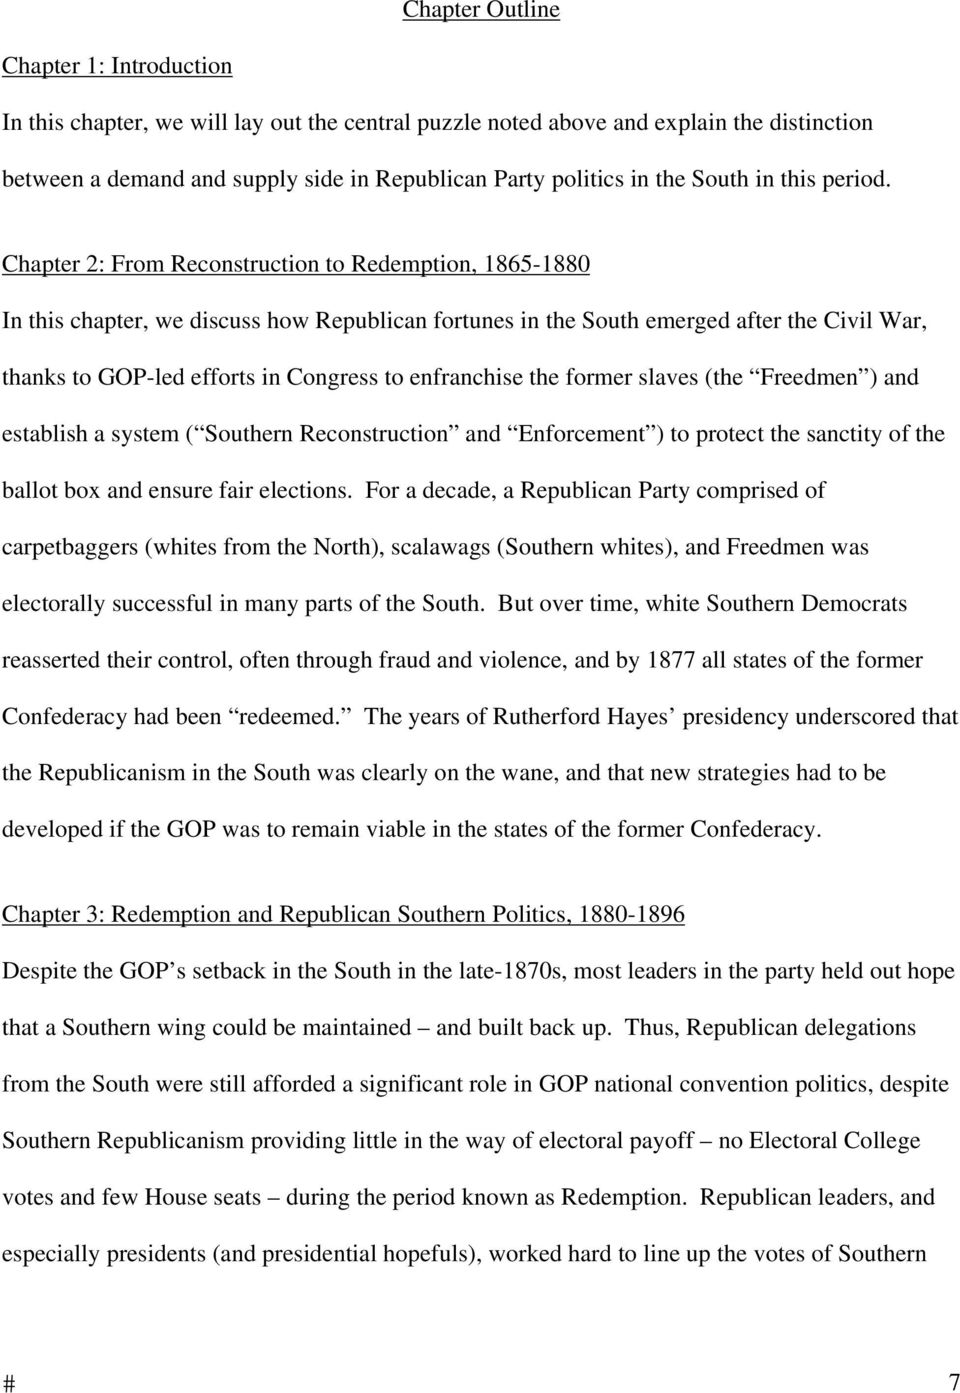 Chapter 2: From Reconstruction to Redemption, 1865-1880 In this chapter, we discuss how Republican fortunes in the South emerged after the Civil War, thanks to GOP-led efforts in Congress to